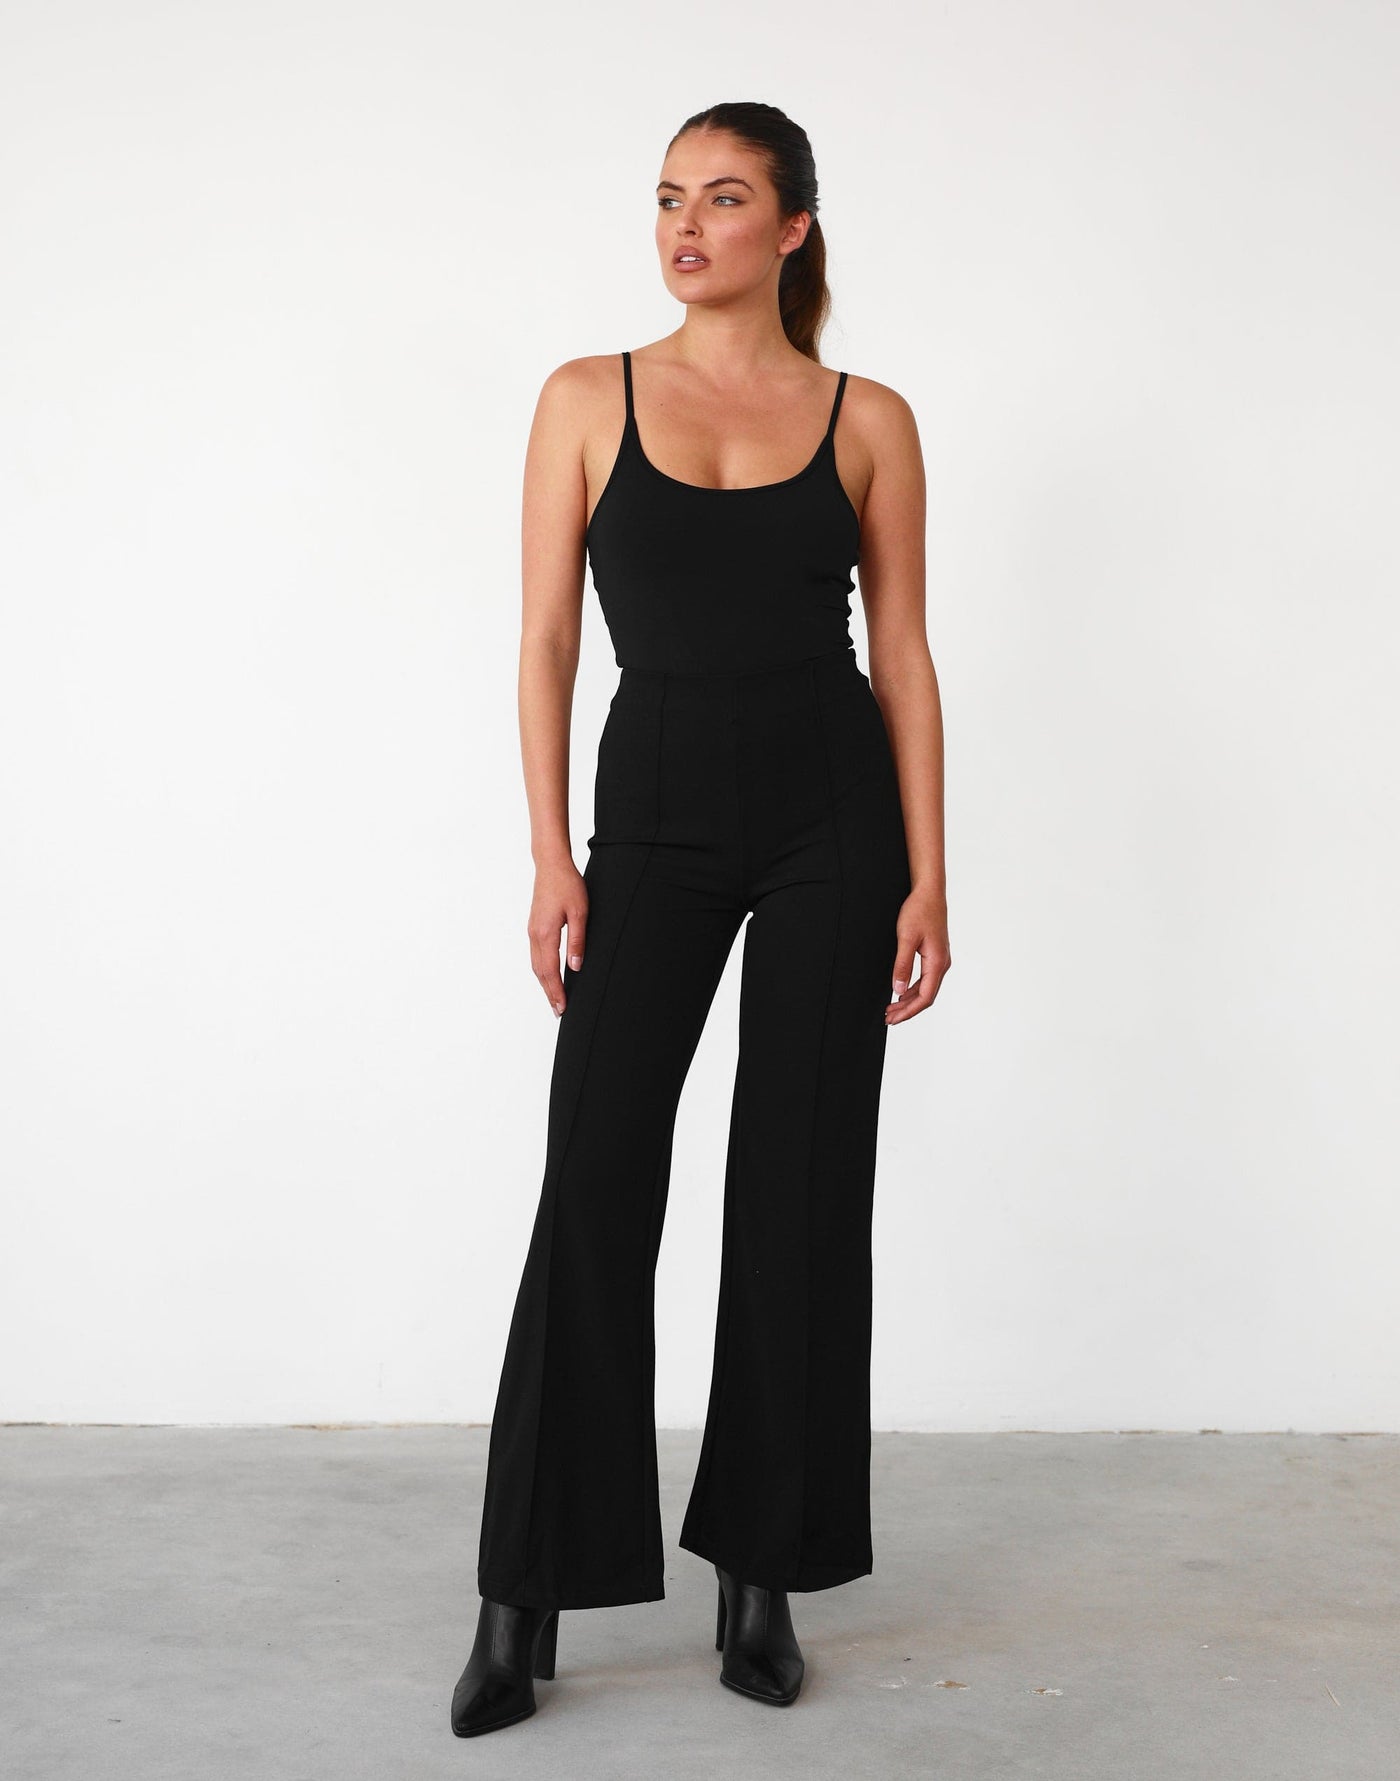 Baxter Pants (Black) - High Waisted Stretch Business Pant - Women's Pants - Charcoal Clothing